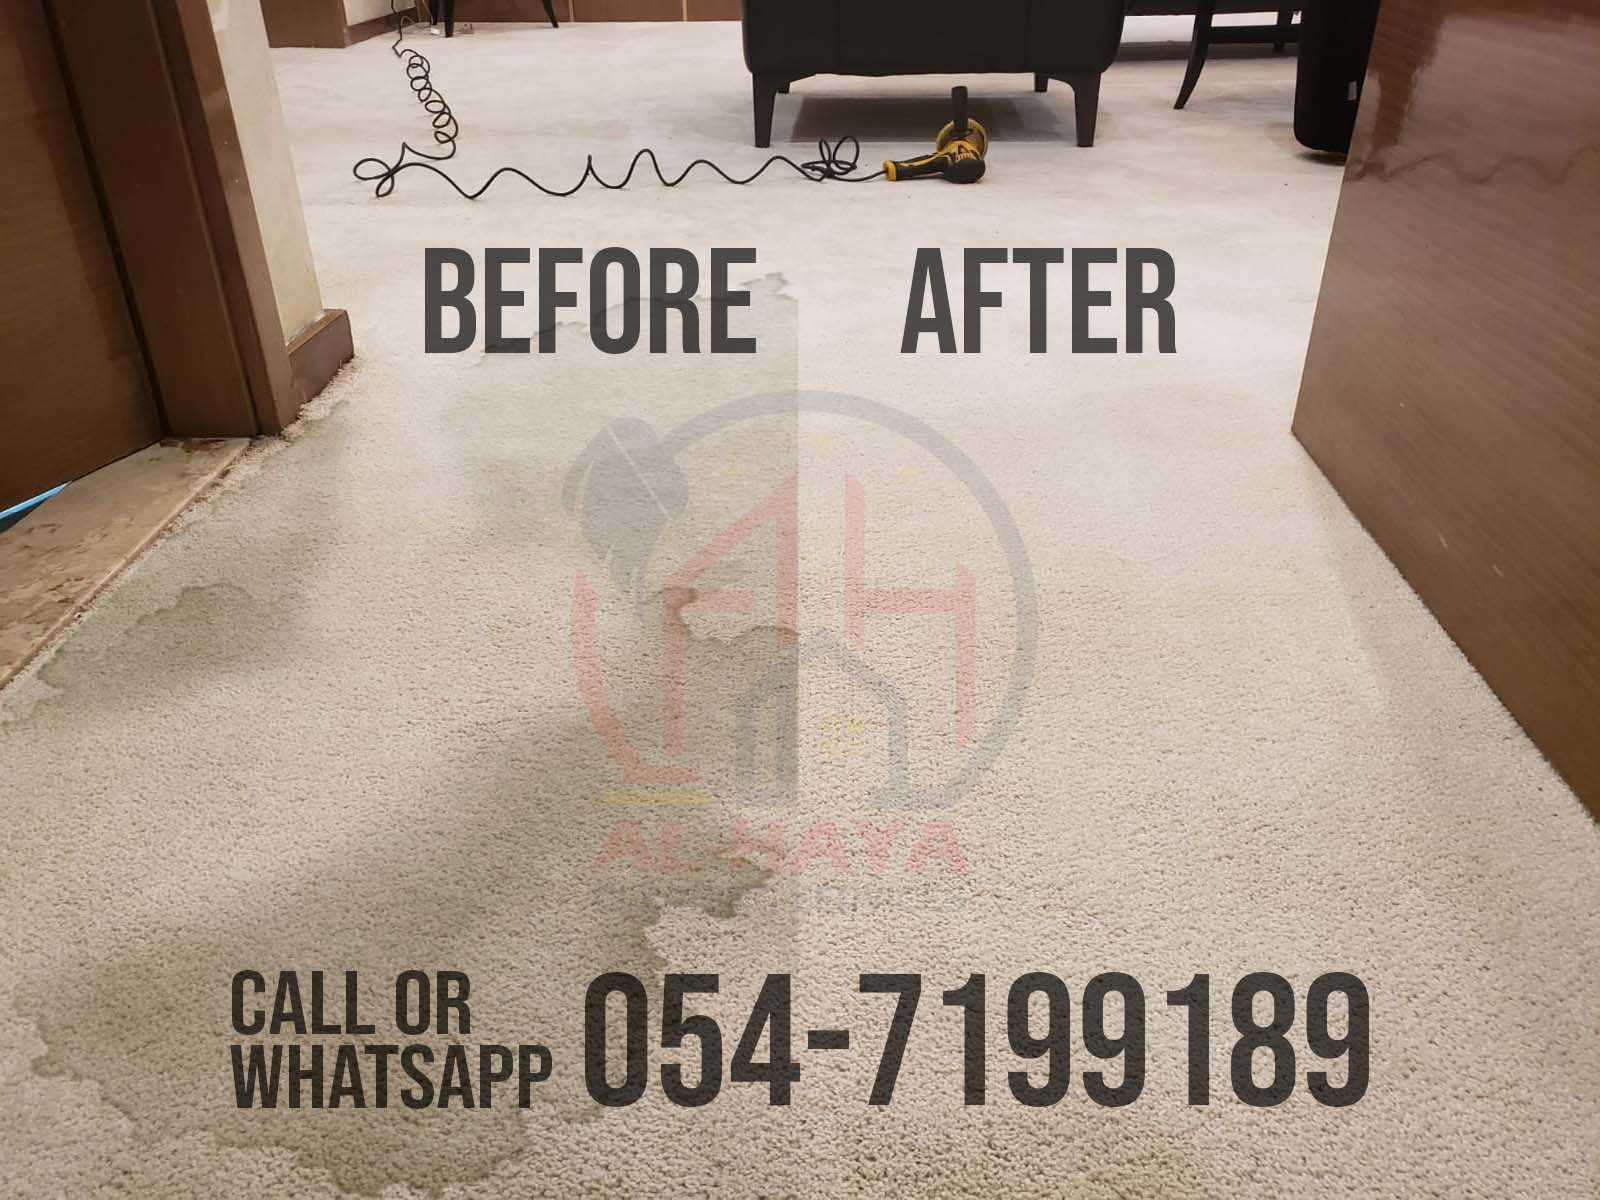 Carpet Cleaning Near Me 0547199189